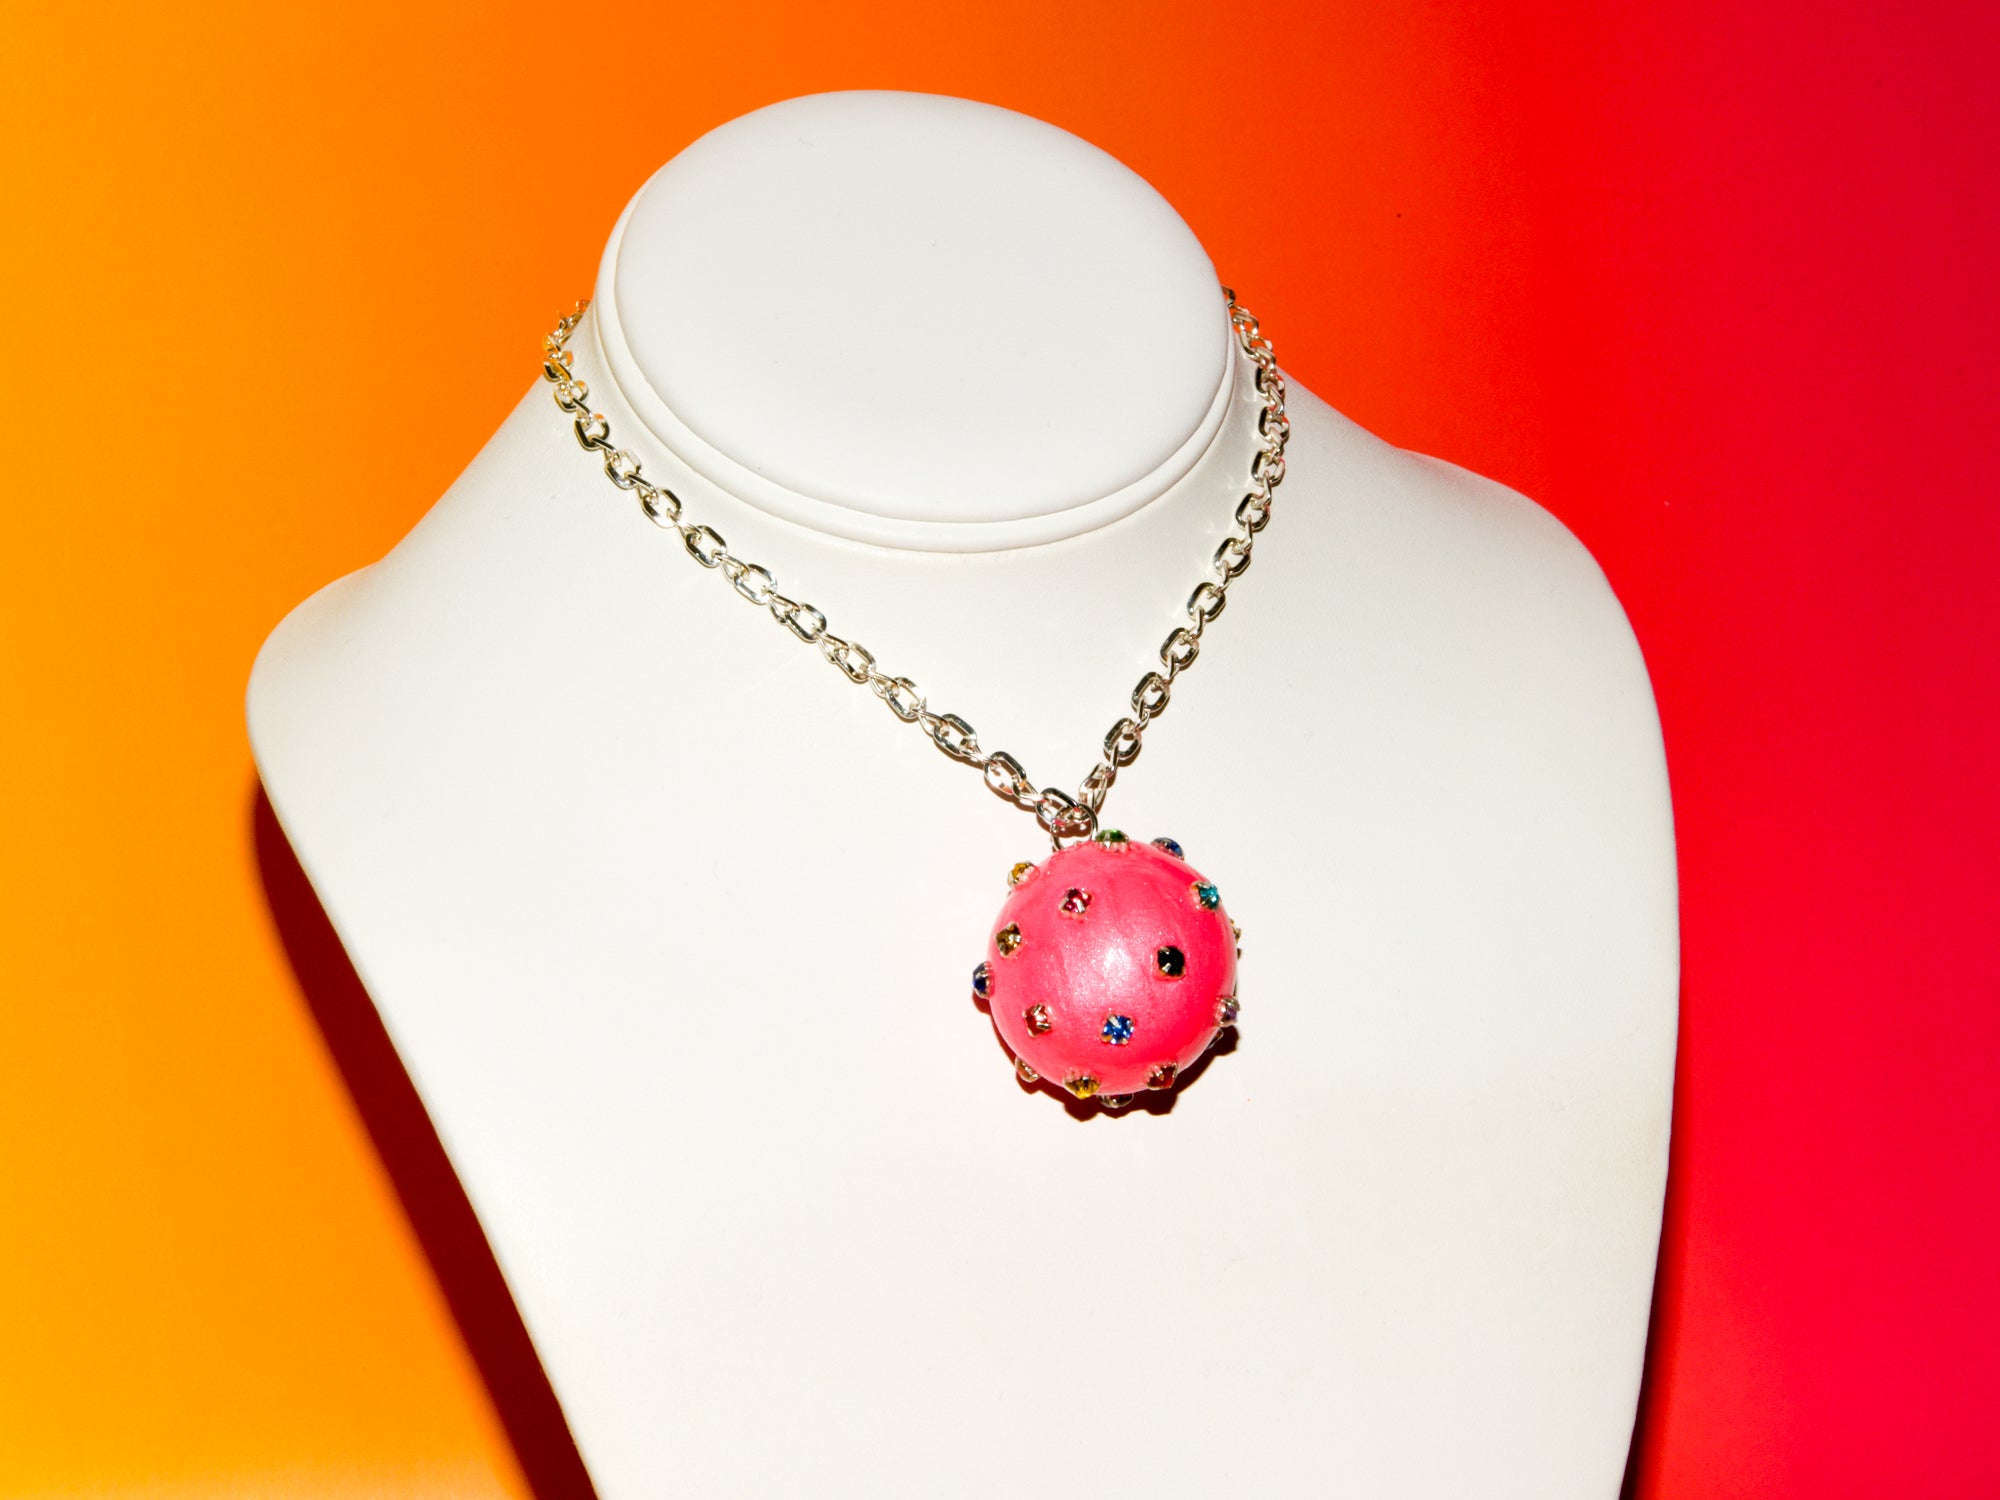 Disco Ball Choker Necklace in Hot Pink